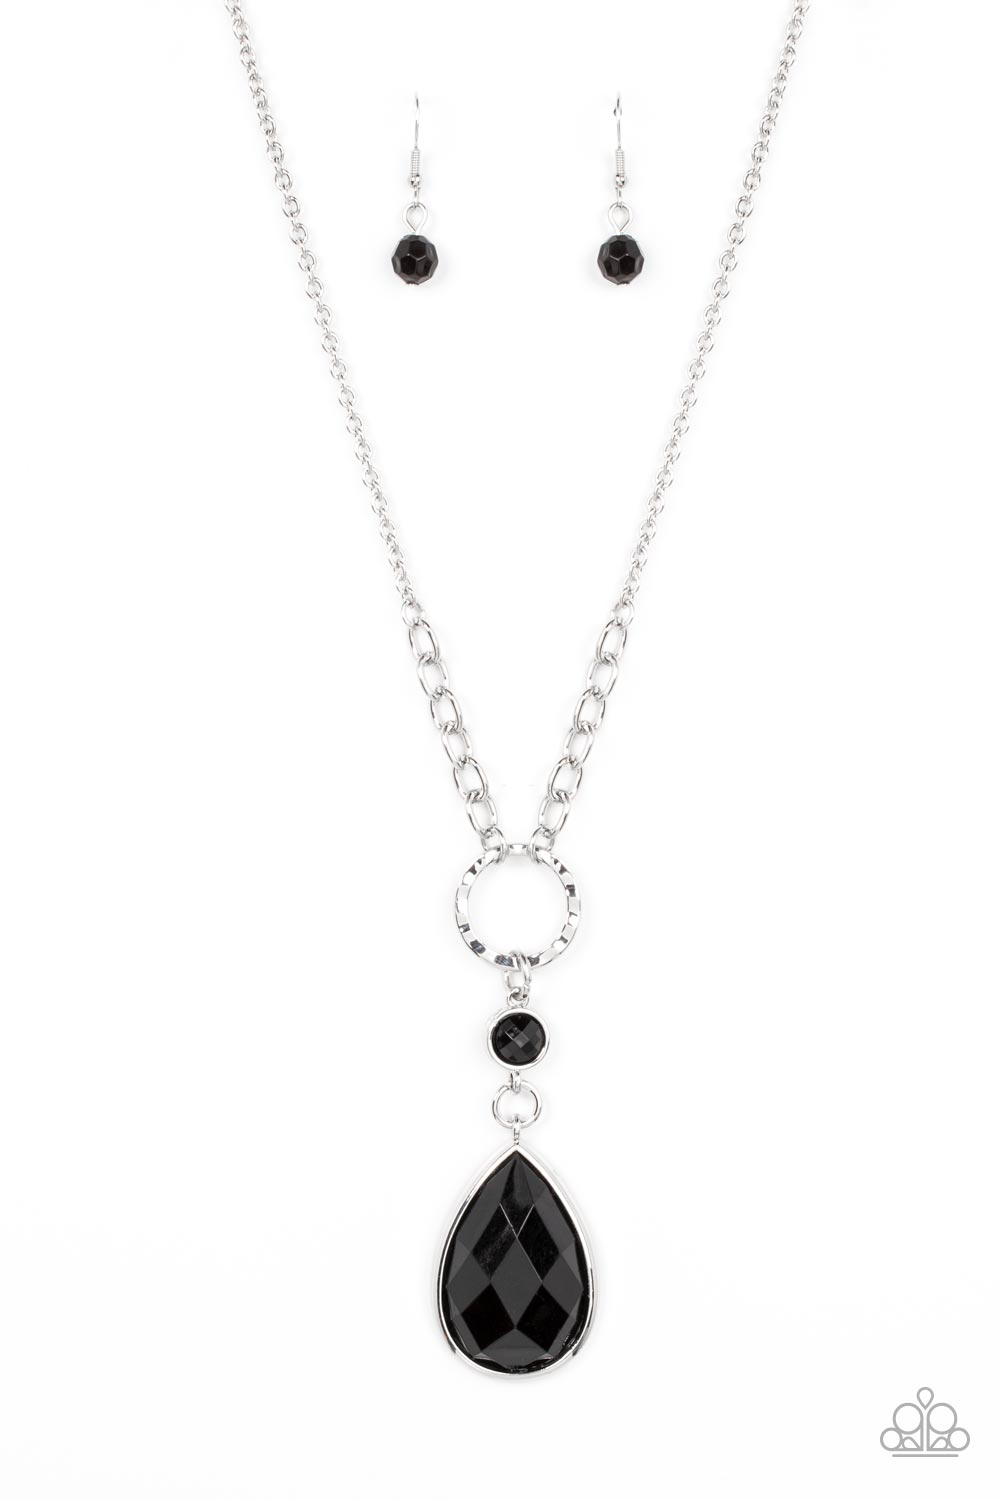 Valley Girl Glamour - Black Oversized Faceted Teardrop Pendant Paparazzi Necklace & matching earrings